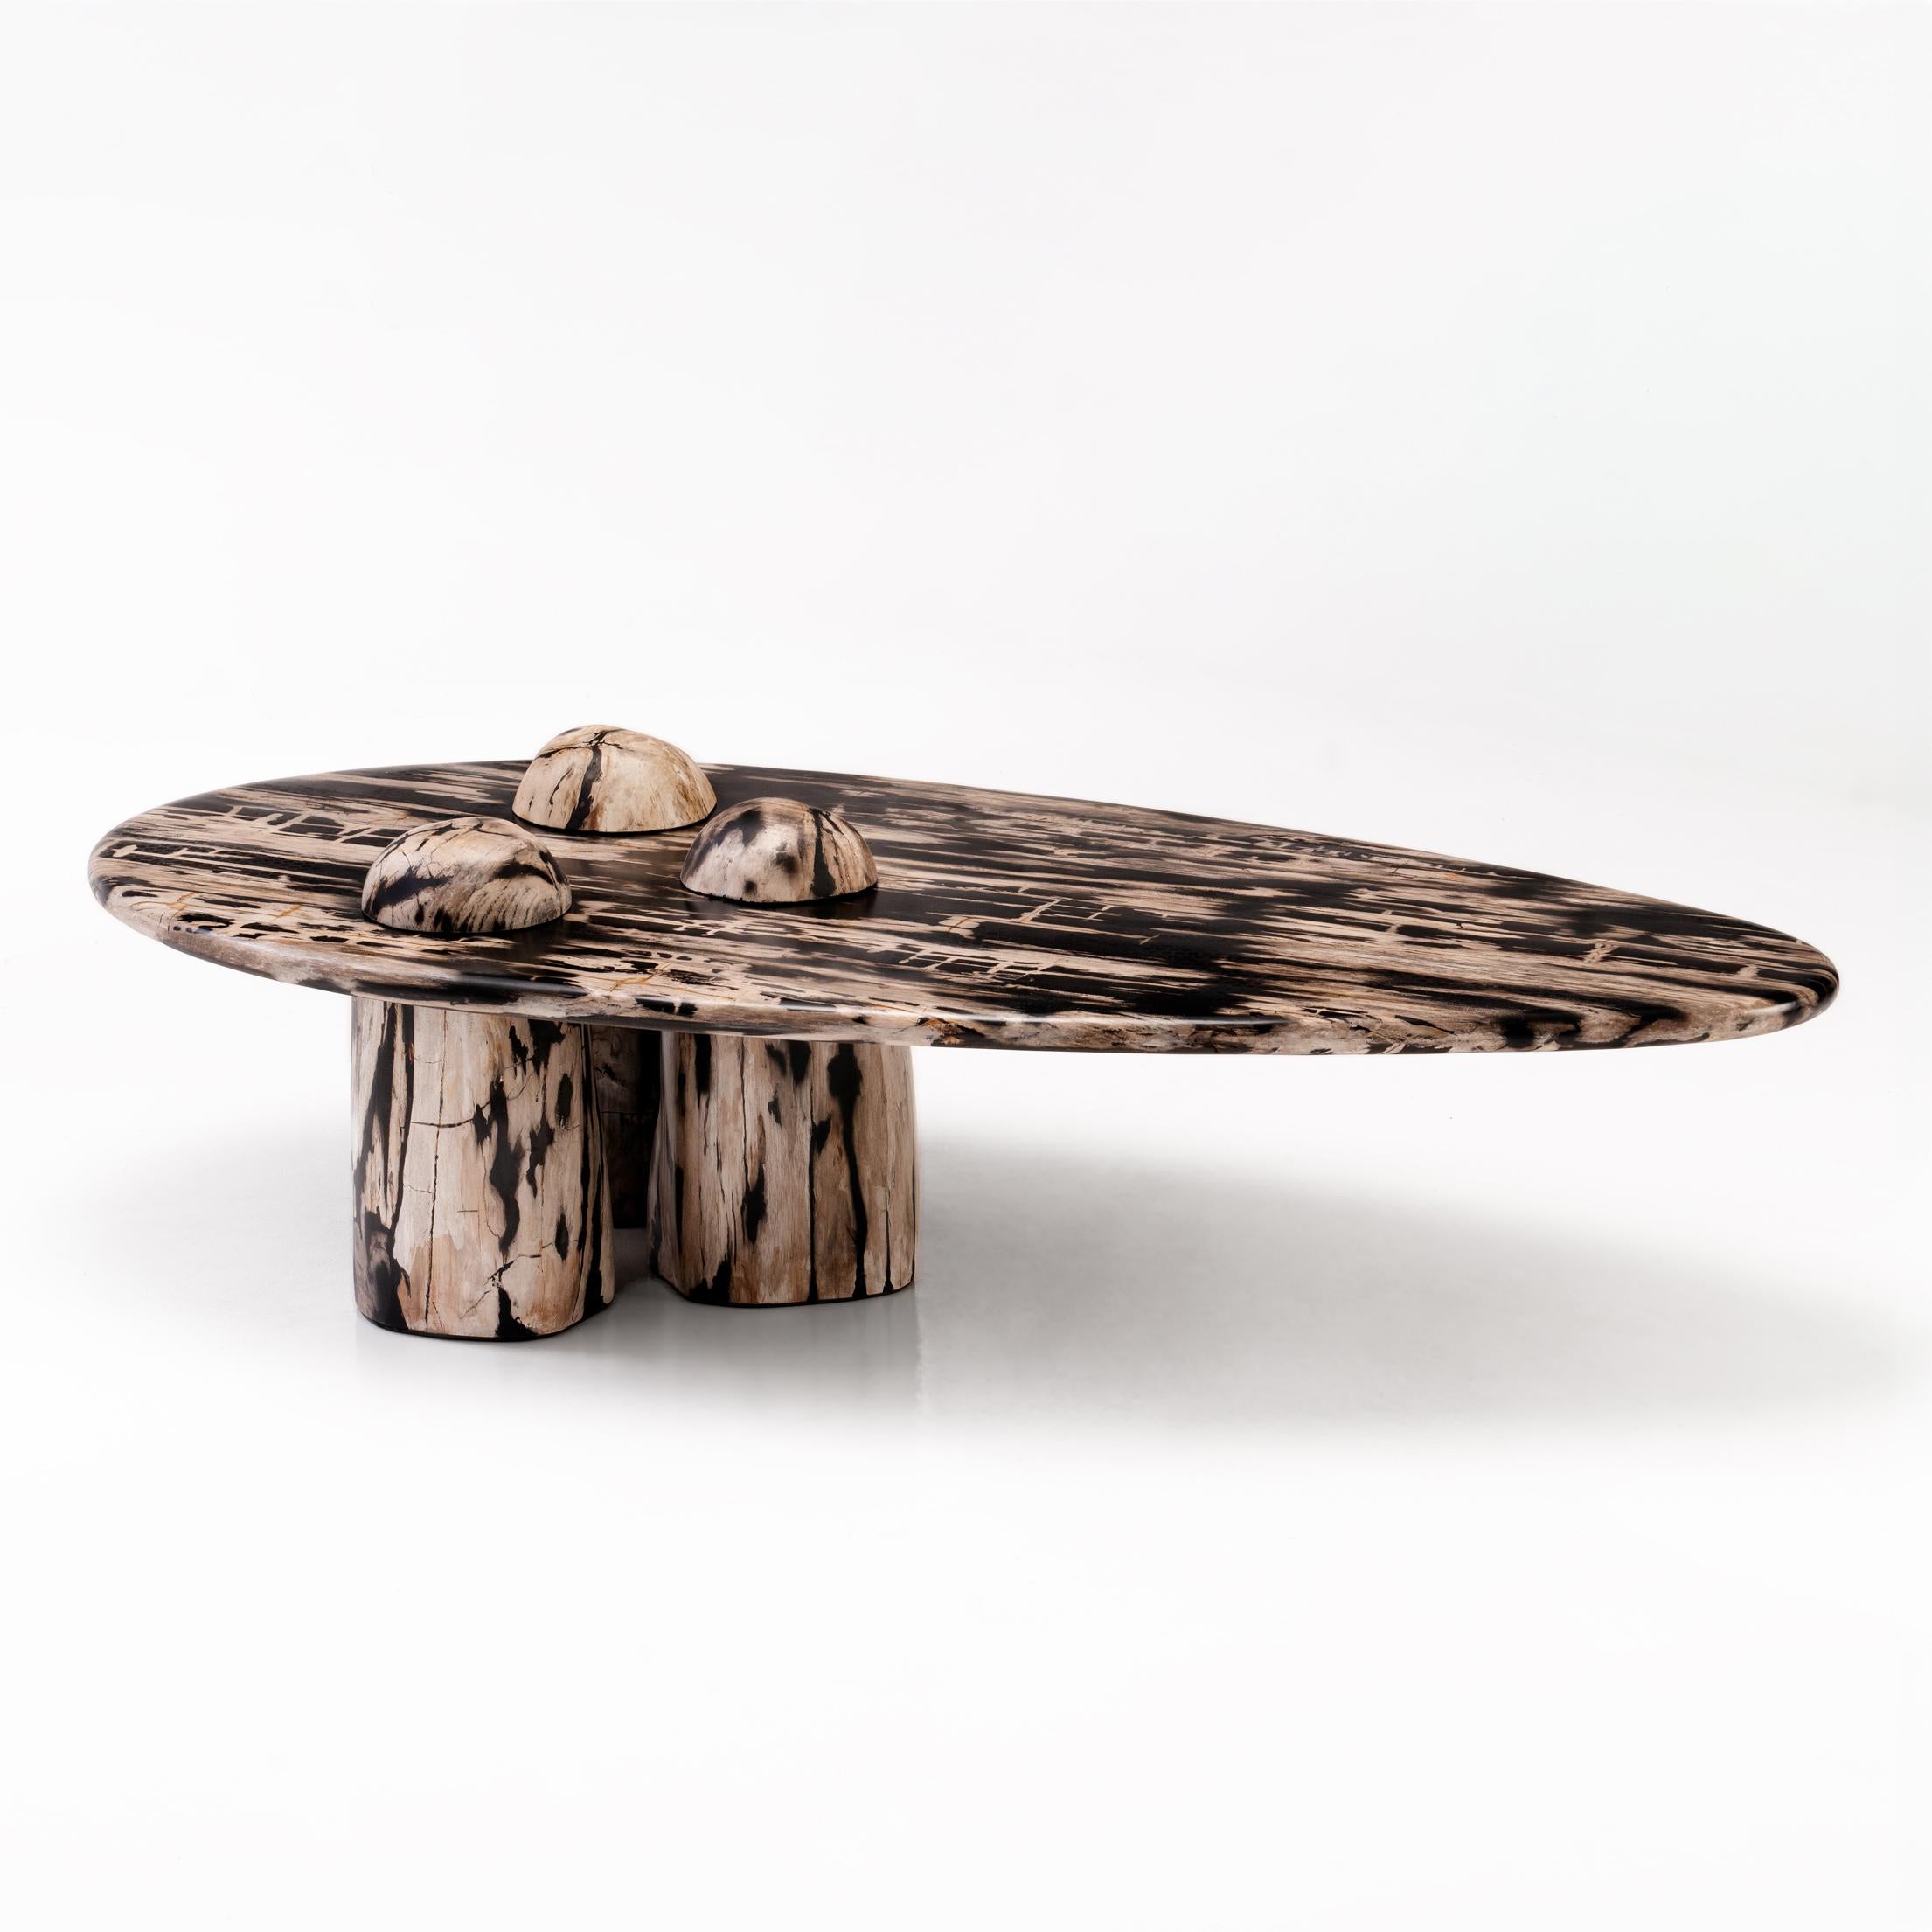 Rocky Montage Coffee Table by Odditi
Unique and Numbered
Dimensions: W 160 x D 74 x H 45 cm
Materials: Petrified Wood

Everyone loves a good montage. Our ‘Rocky Montage’ coffee table pays homage to the world of organic stone sculptures and their